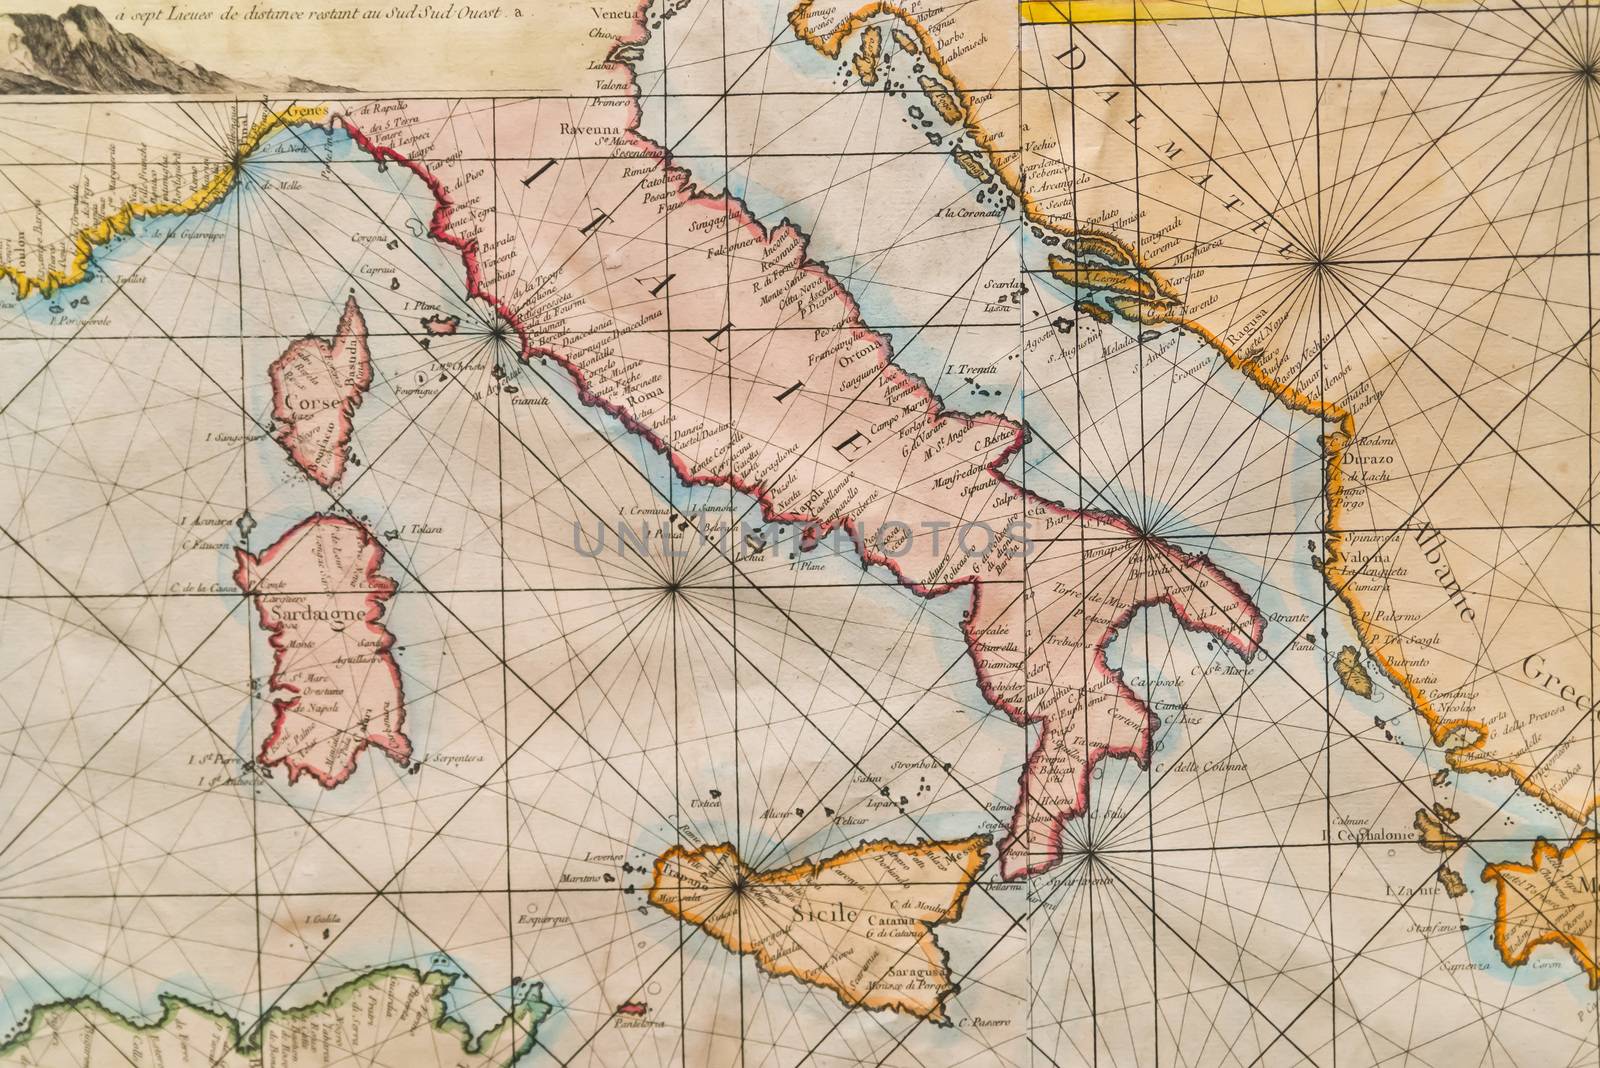 Old map of Italy, Sicily, Corsica, Croatia and Sardinia by furzyk73